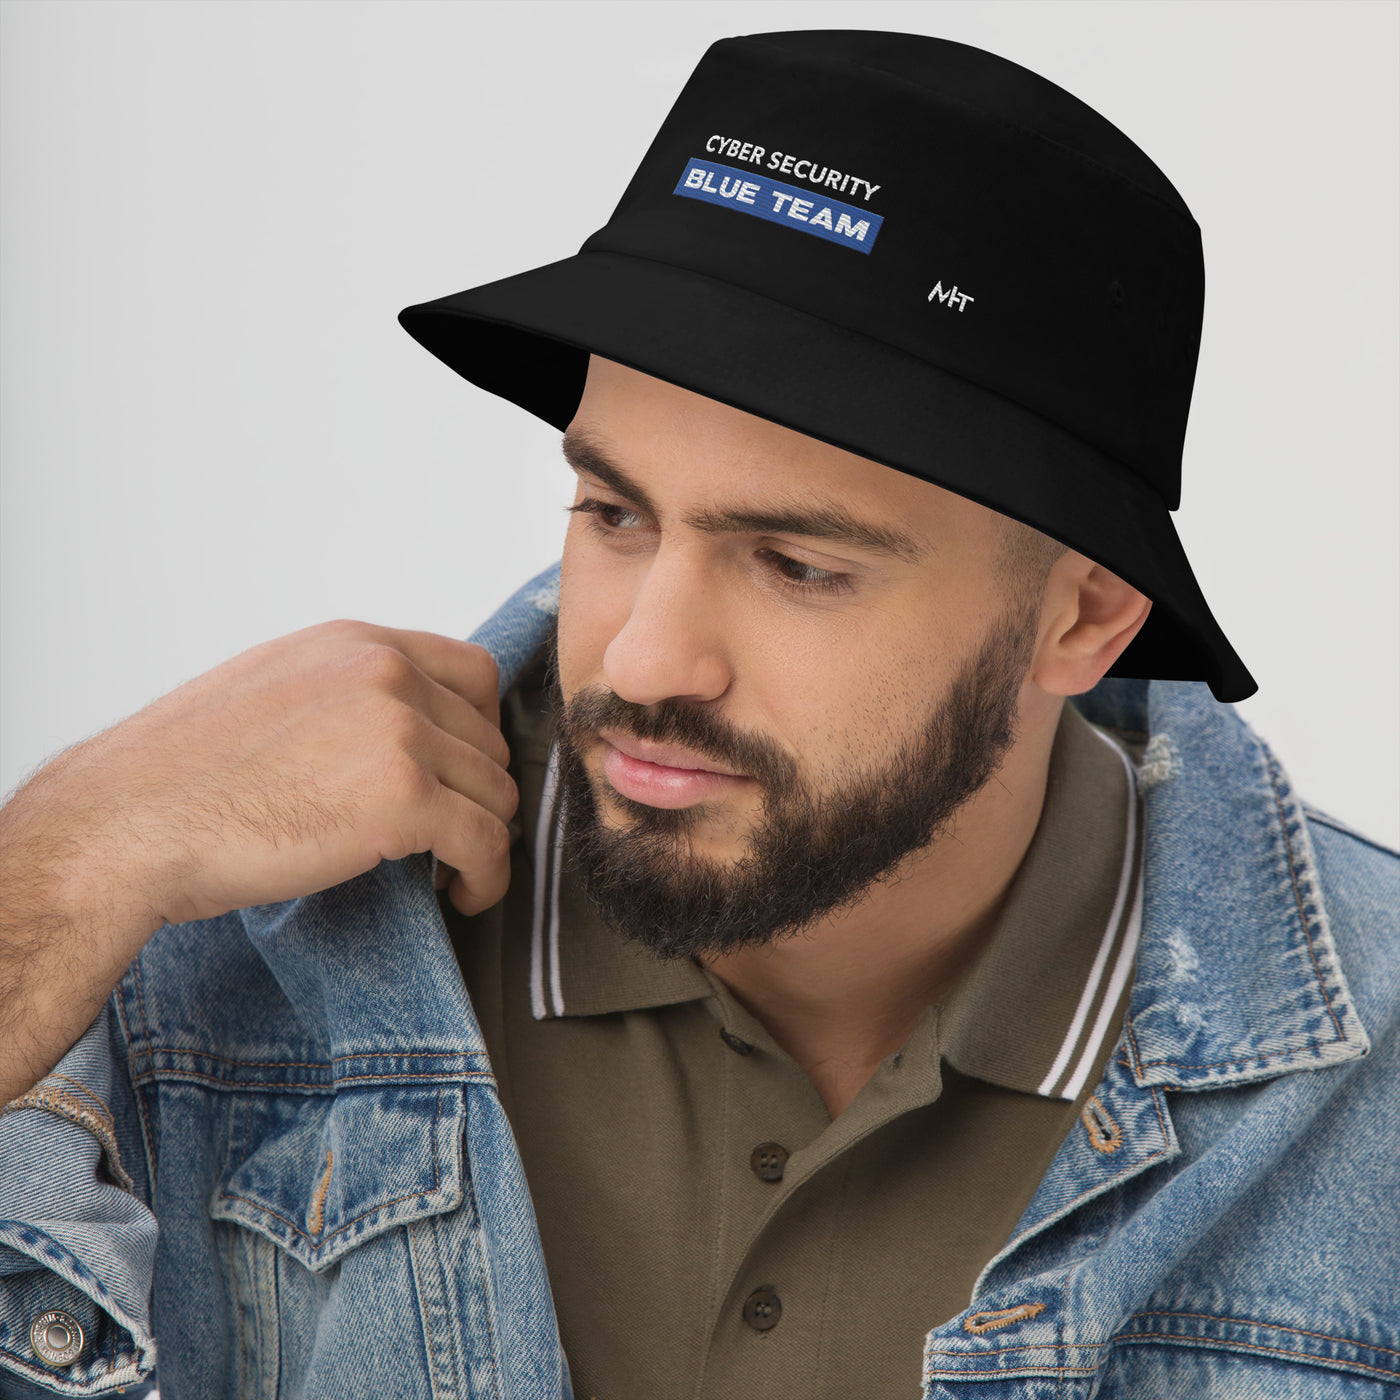 Cyber Security Blue Team V9 - Bucket Hat